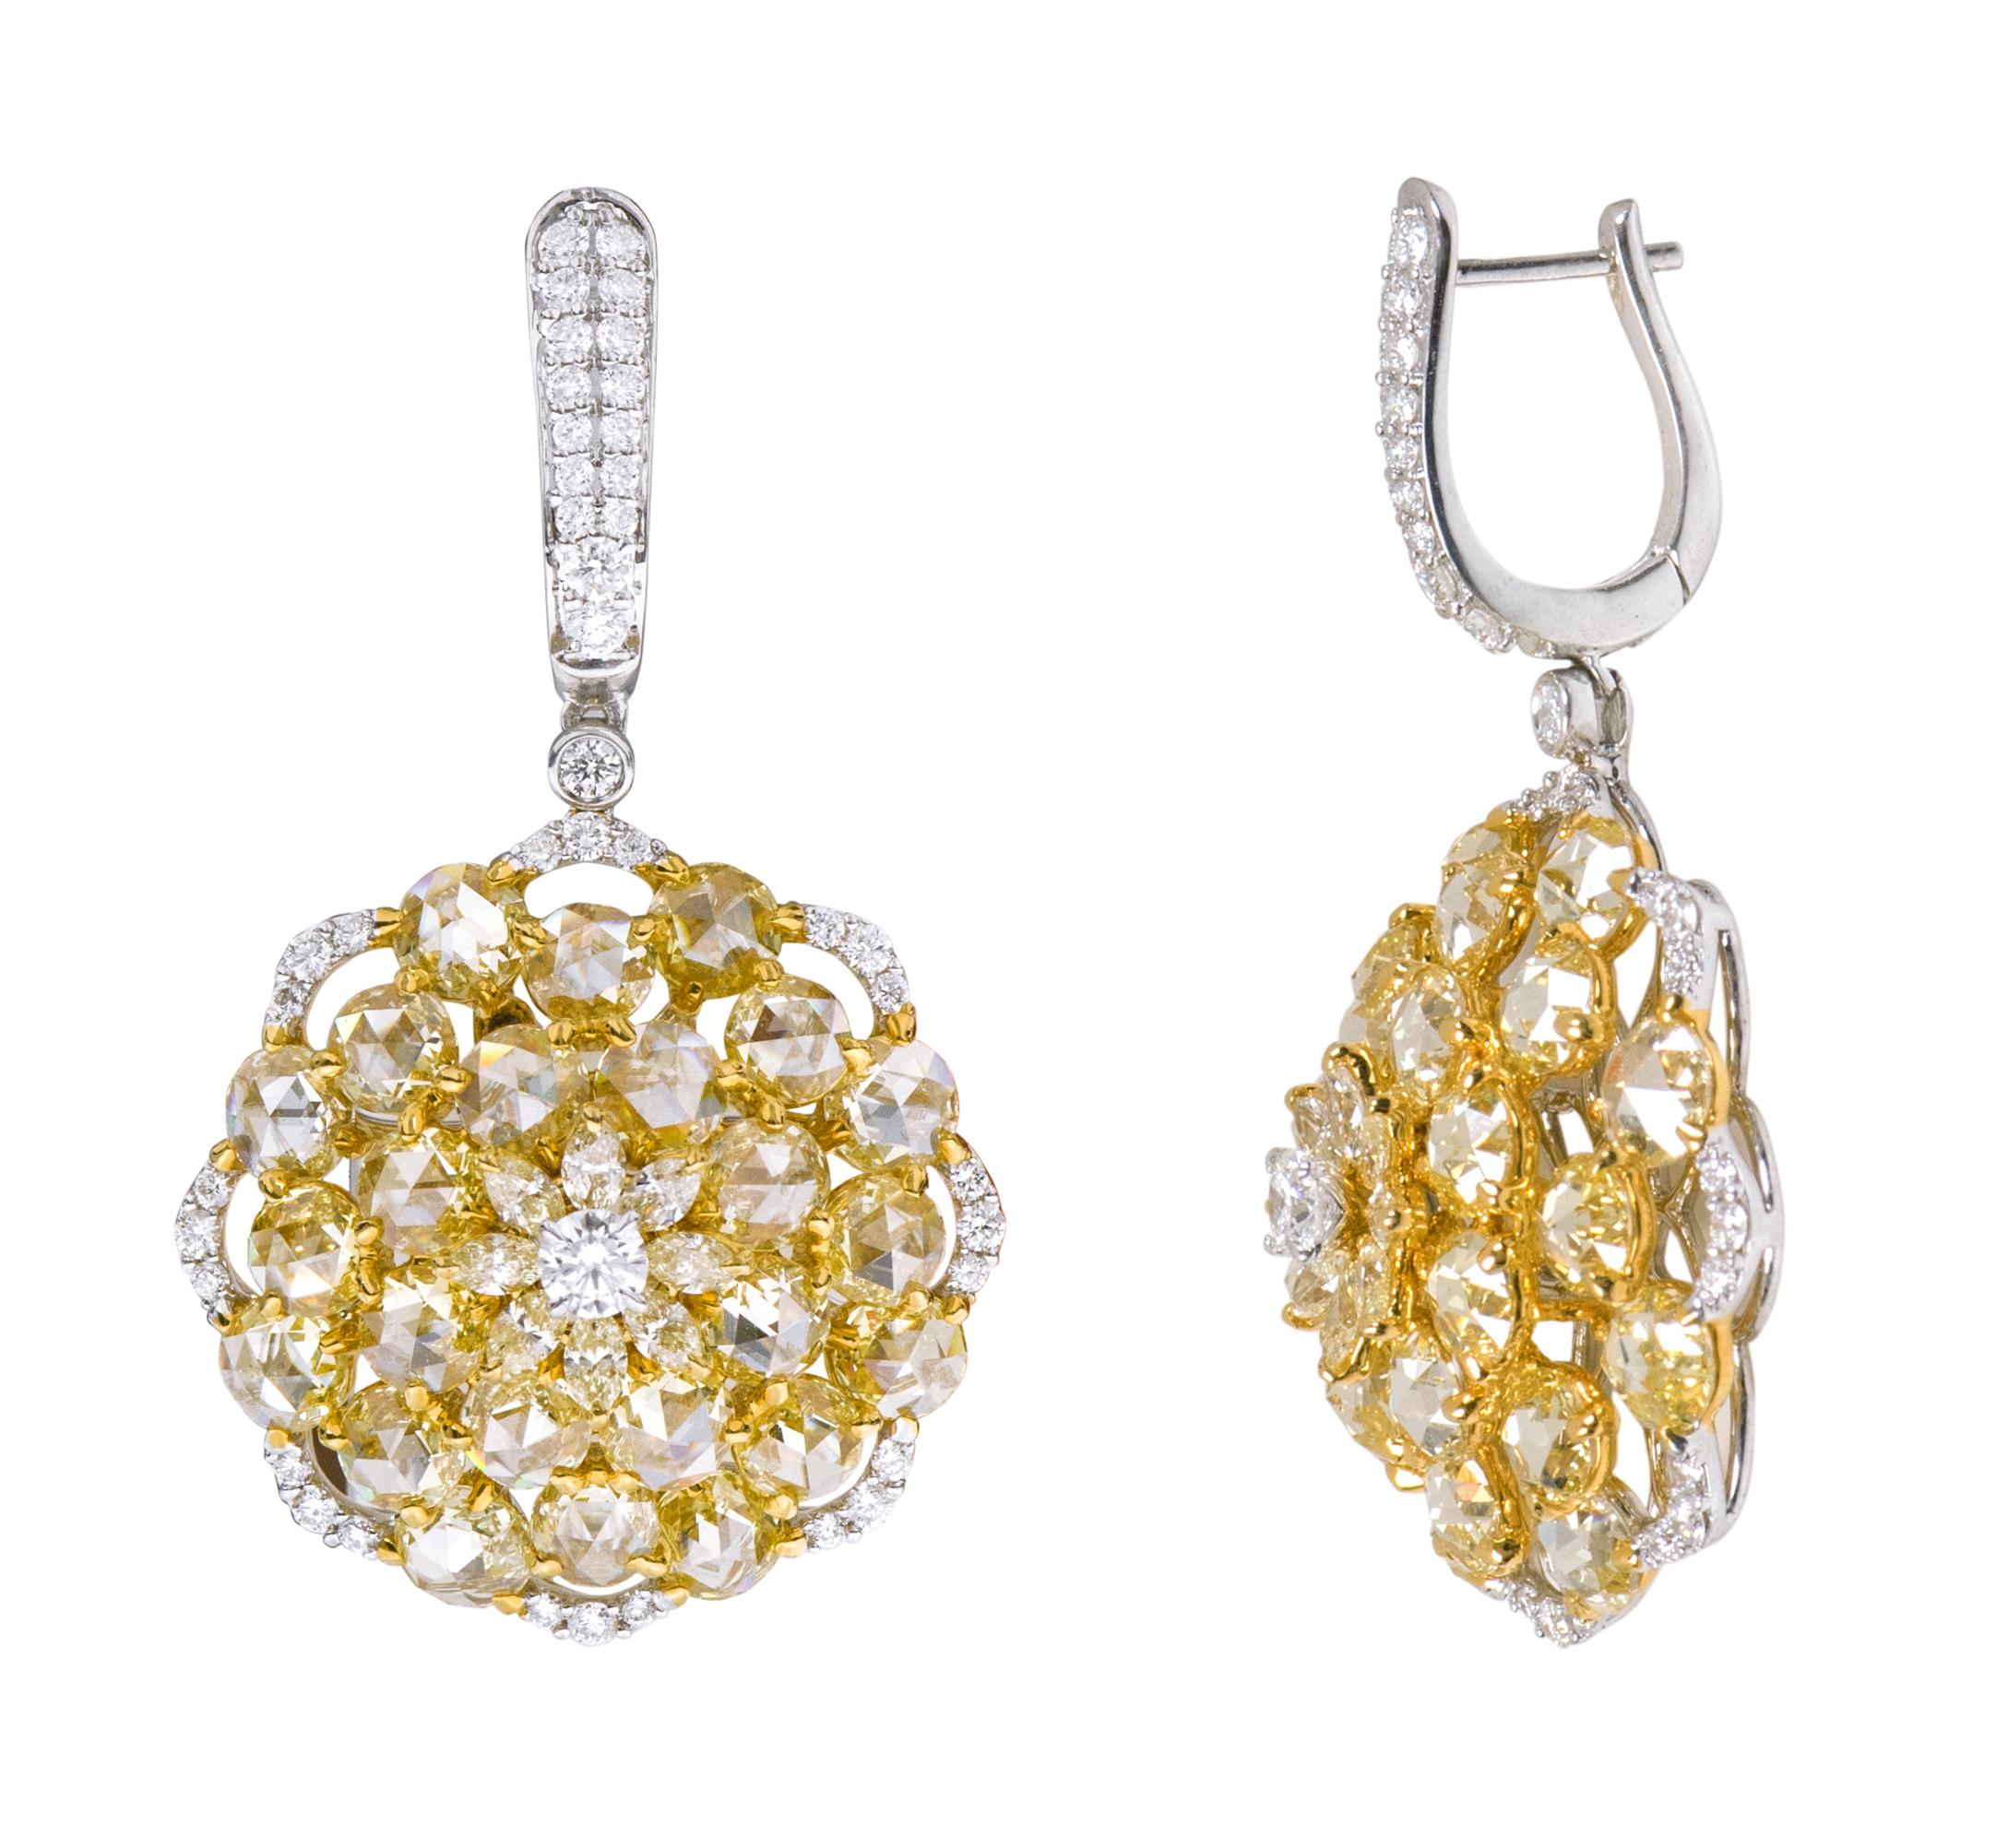 18 Karat Gold 8.69 Carat Yellow and White Diamond Drop Cocktail Earrings

This phenomenal canary yellow diamond and white diamond sunflower style earring is vividly magical. The design is magnificently created in various levels to fire up the